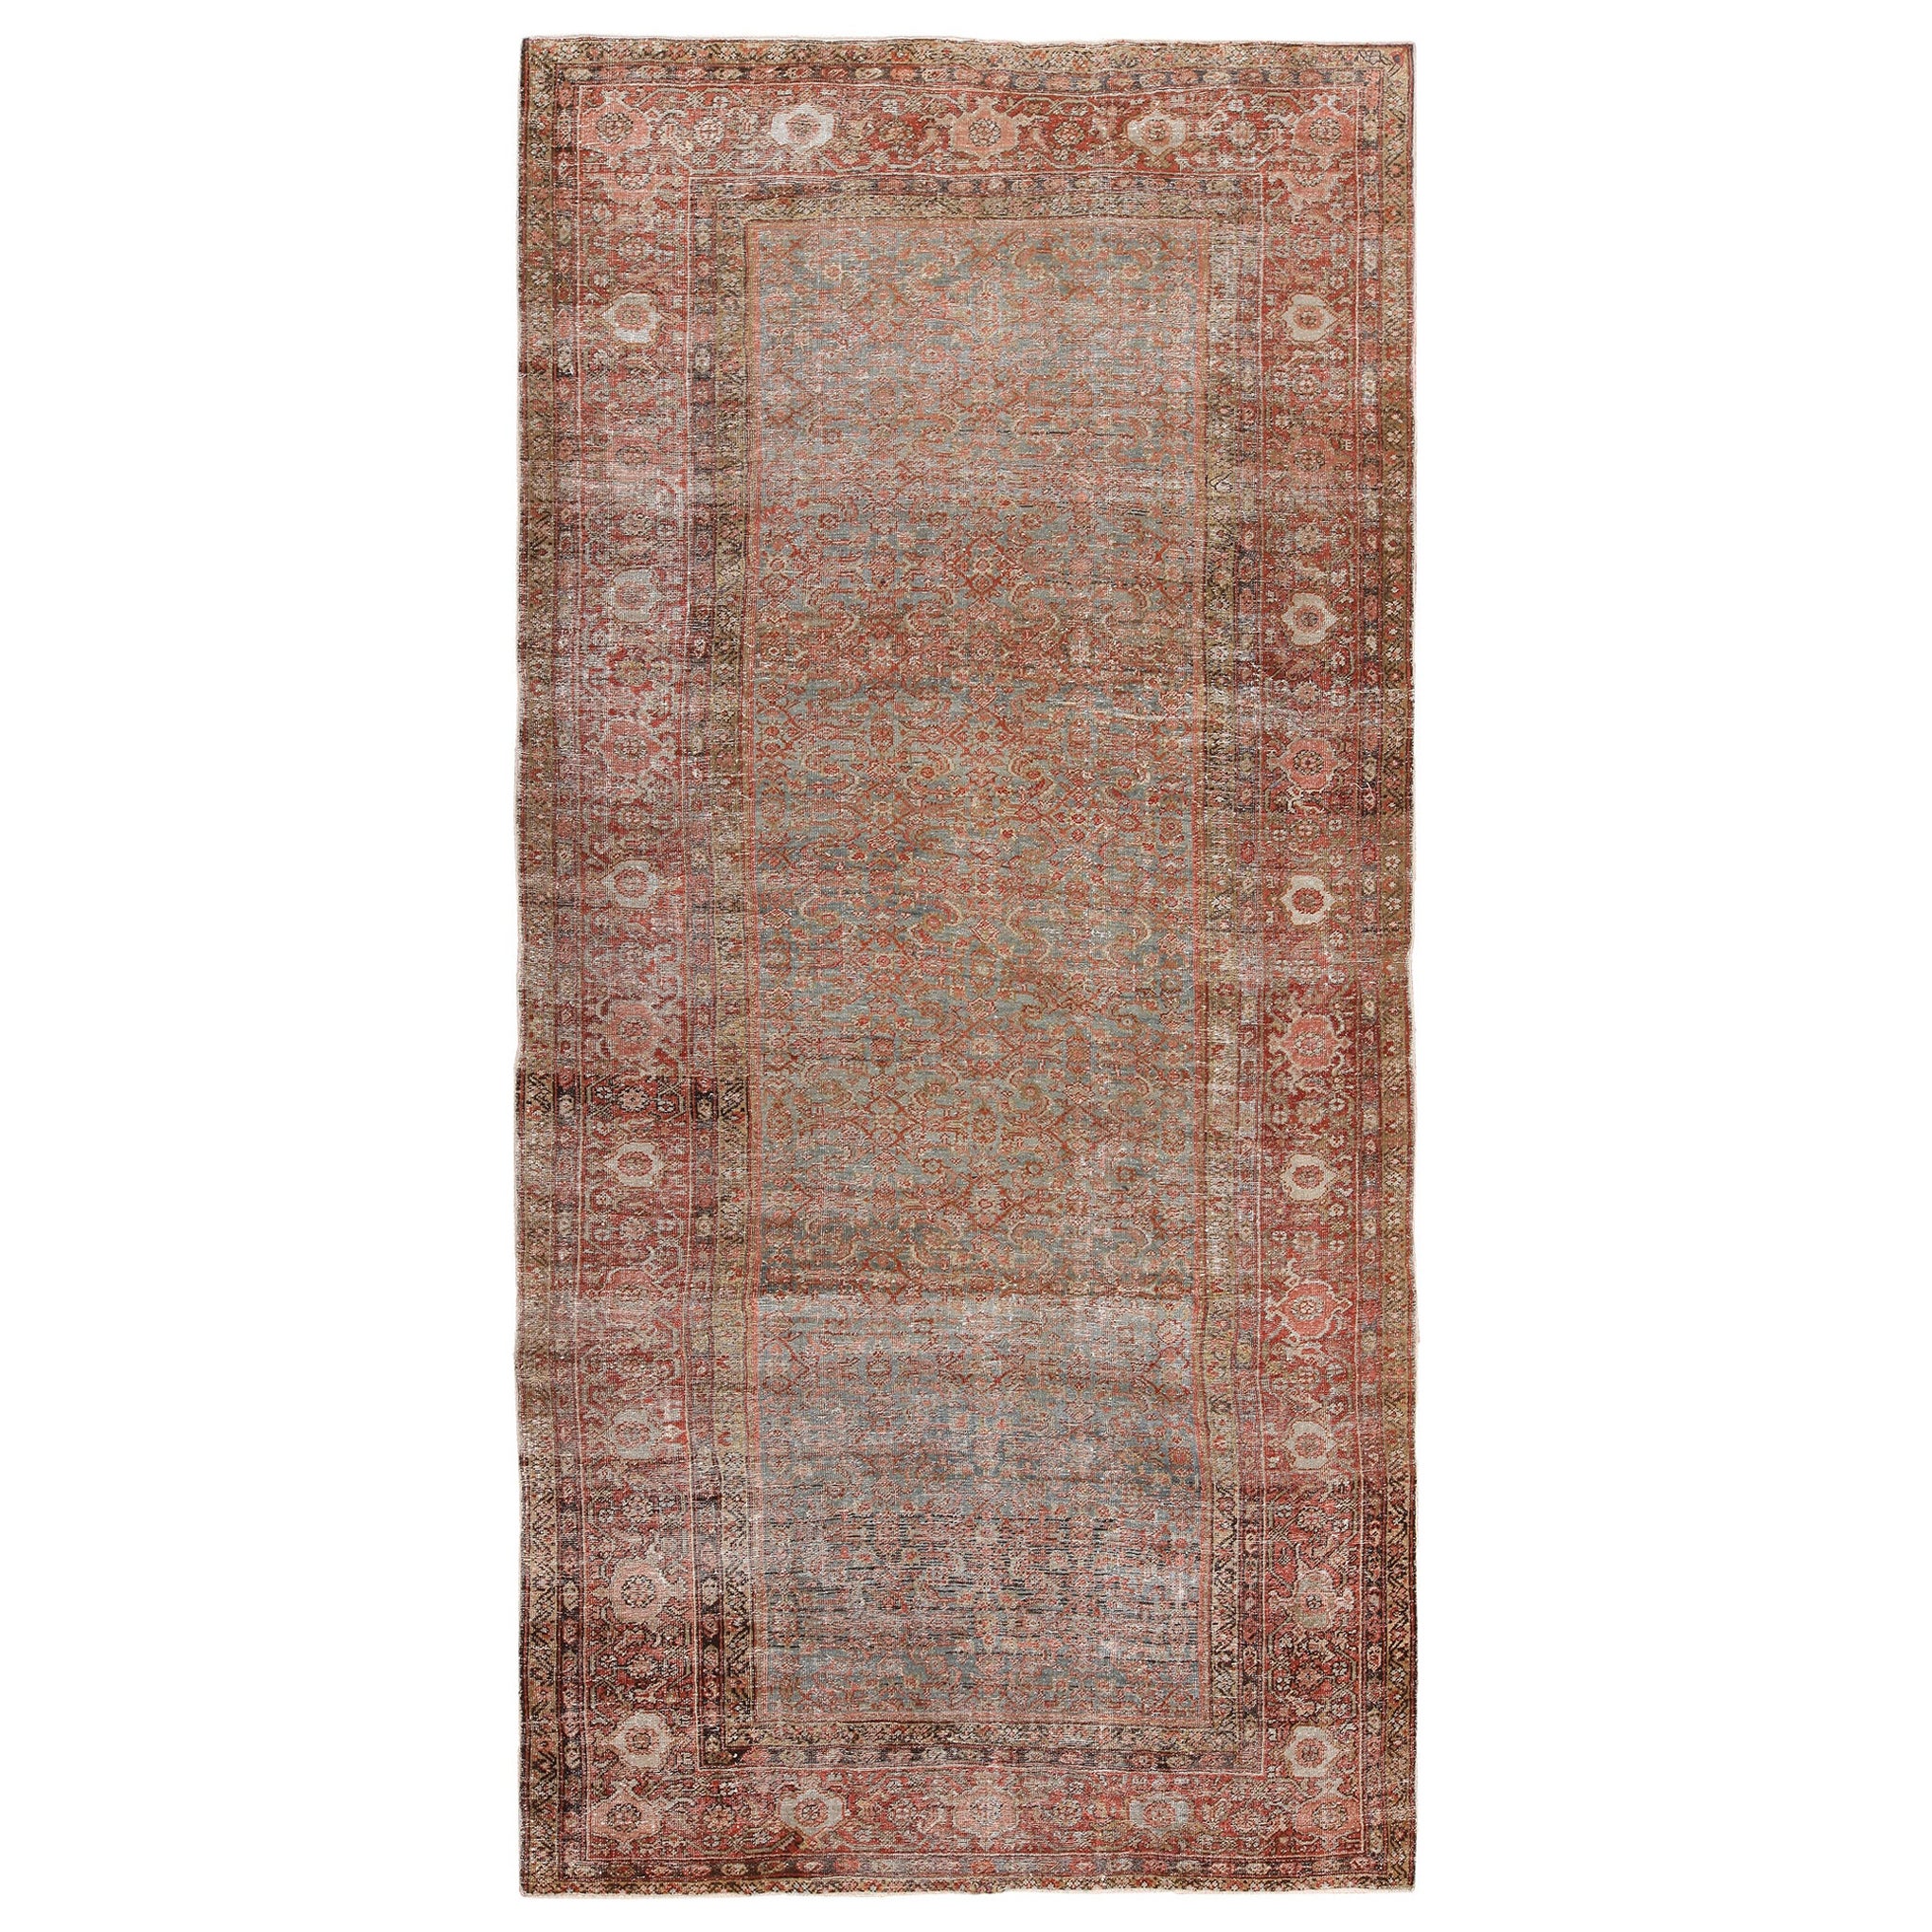 Antique Persian Shabby Chic 19th Century Sultanabad Rug 6'7" x 13'3" For Sale